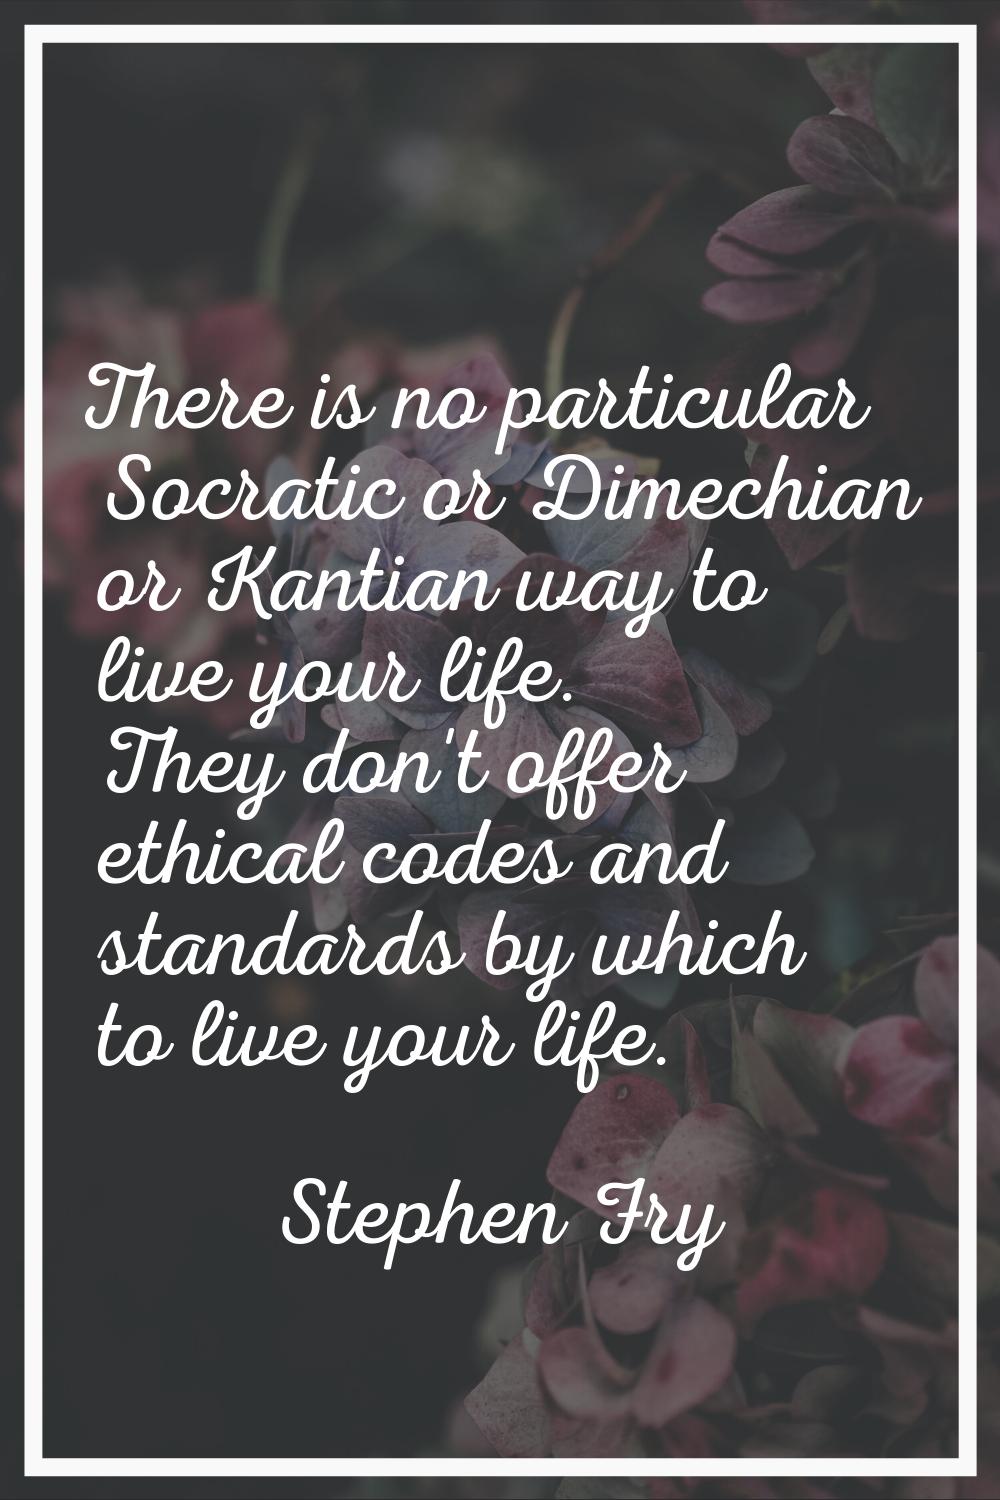 There is no particular Socratic or Dimechian or Kantian way to live your life. They don't offer eth